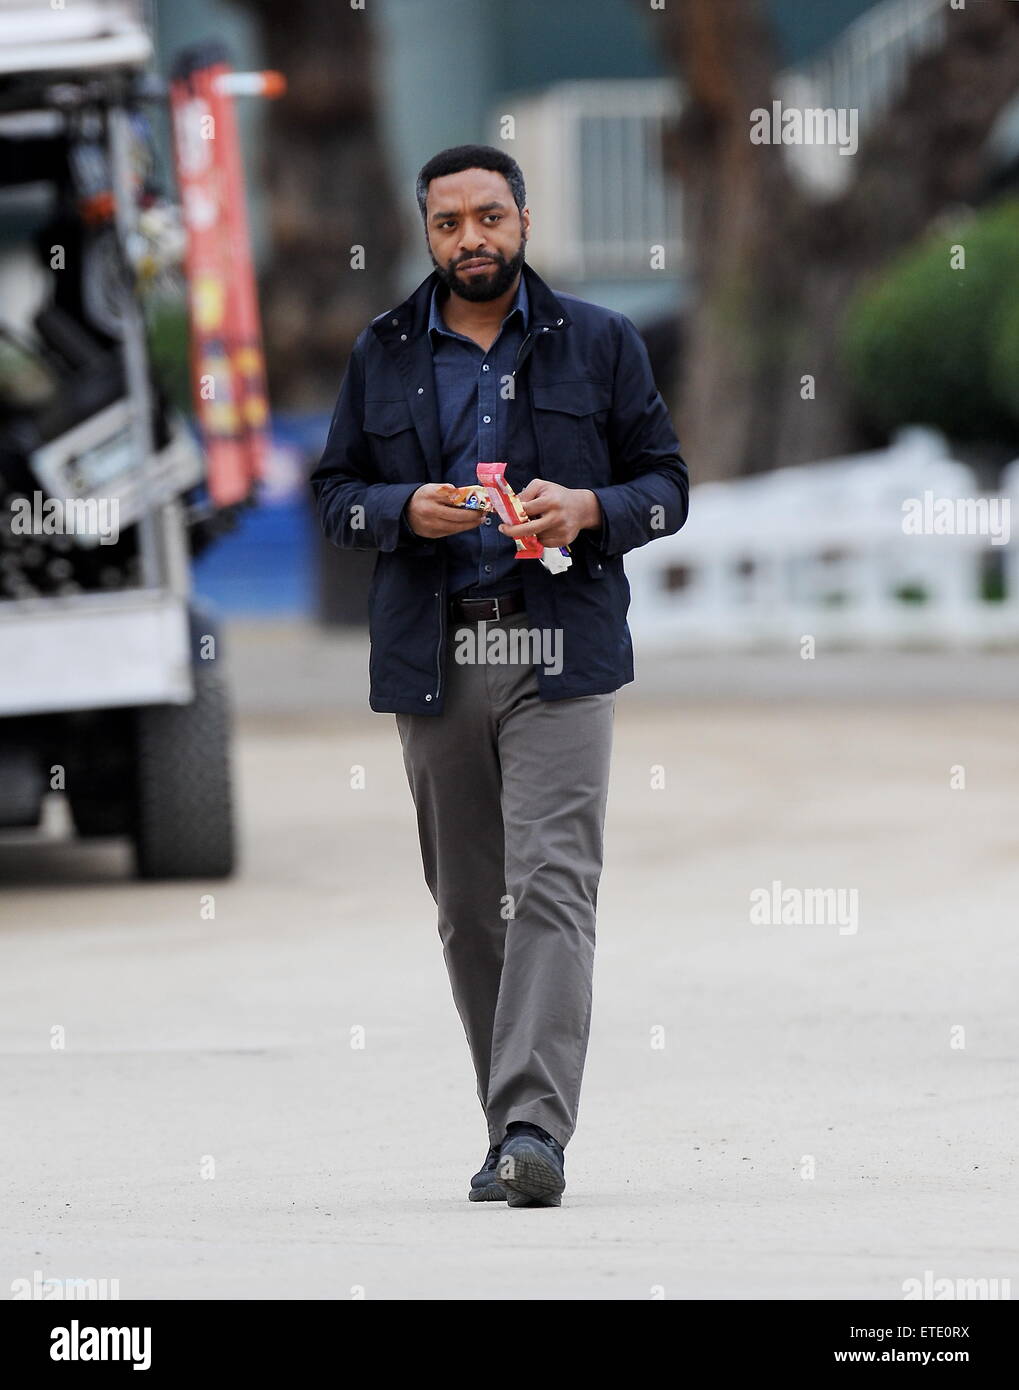 Oscar nominee "12 Years A Slave" star Chiwetel Ejiofor spotted on the set of "The Secret In Their Eyes" filming in Pasadena Ca. The actor was joined by co star Dean Norris from "Breaking Bad" and Daniel Moder as the cinematographer for the film. Daniel's famous wife Julia Roberts is also casted for the film.  Featuring: Chiwetel Ejiofor Where: Pasadena, California, United States When: 28 Jan 2015 Credit: Cousart/JFXimages/WENN.com Stock Photo